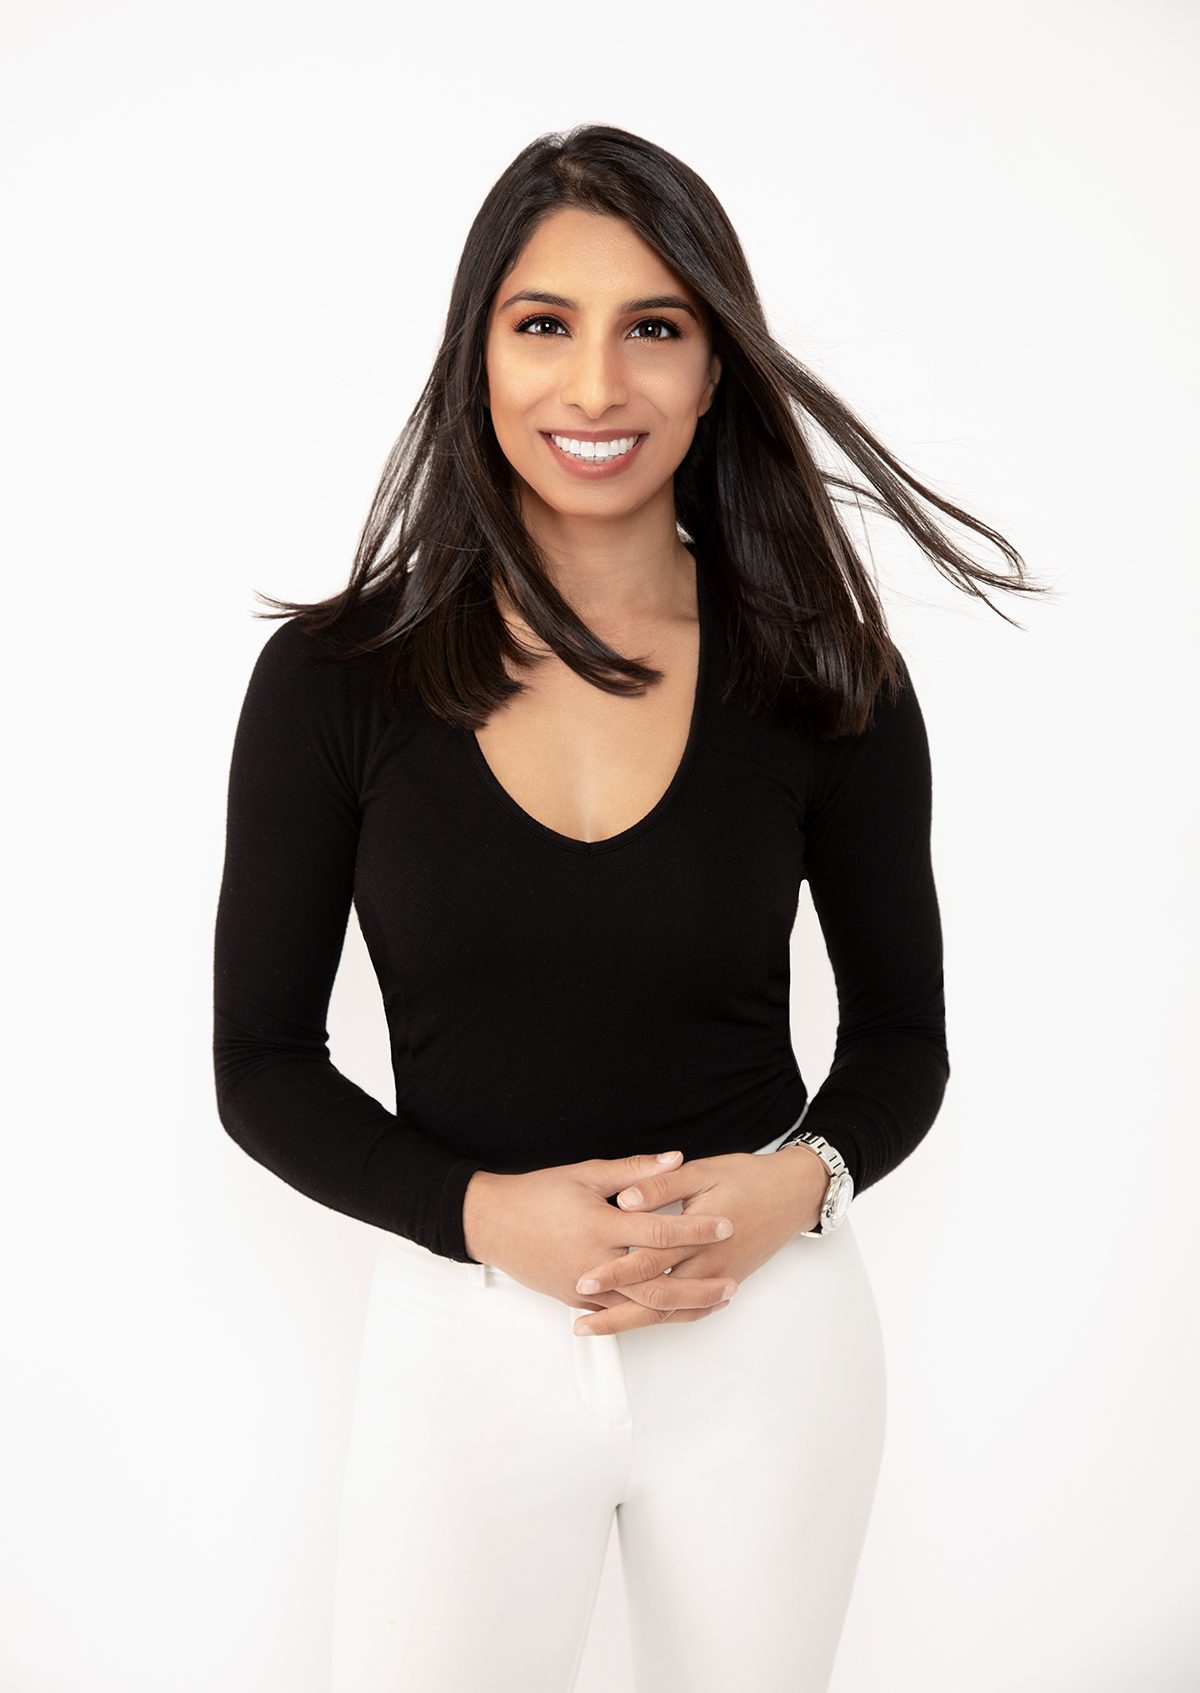 Modern personal branding portrait of a woman wearing business casual dress with white pants on a white background. The subjects hair is blowing and she is smiling and approachable. Personal Branding Photography by Andrea Liora Studios in San Francisco.